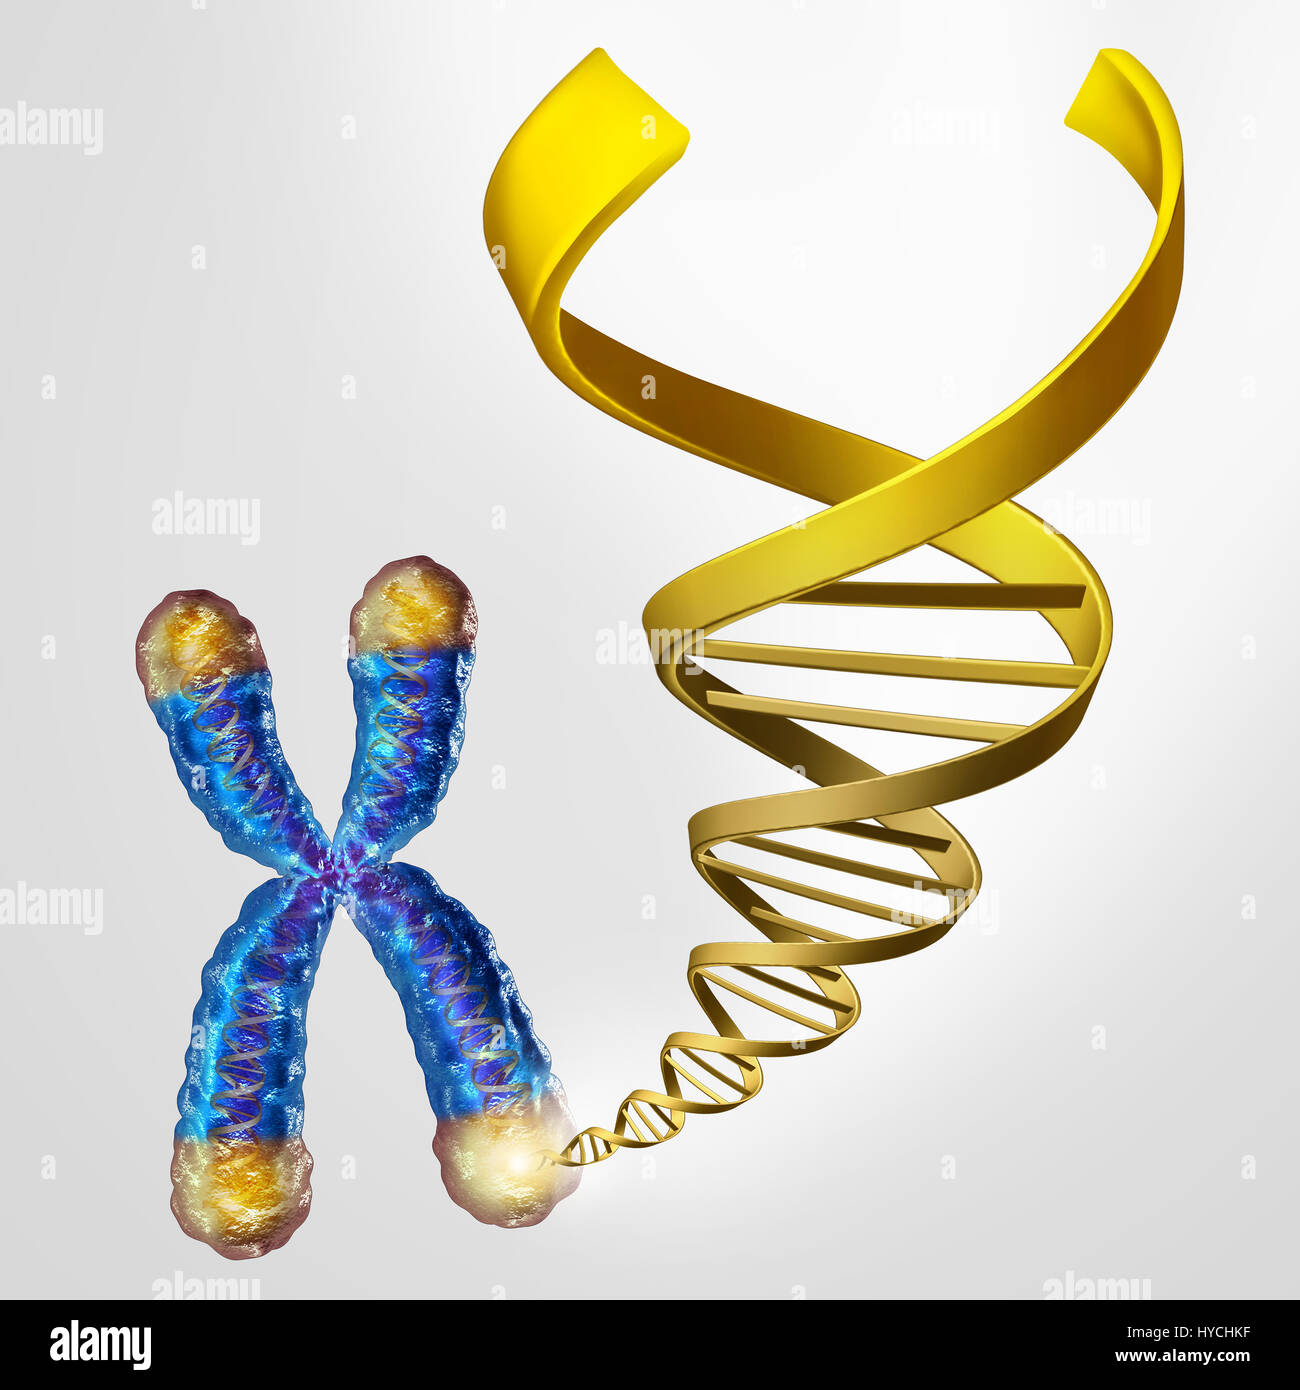 Telomeres DNA and telomere length medical concept on the end caps of a chromosome as a symbol for aging and genetic protection. Stock Photo